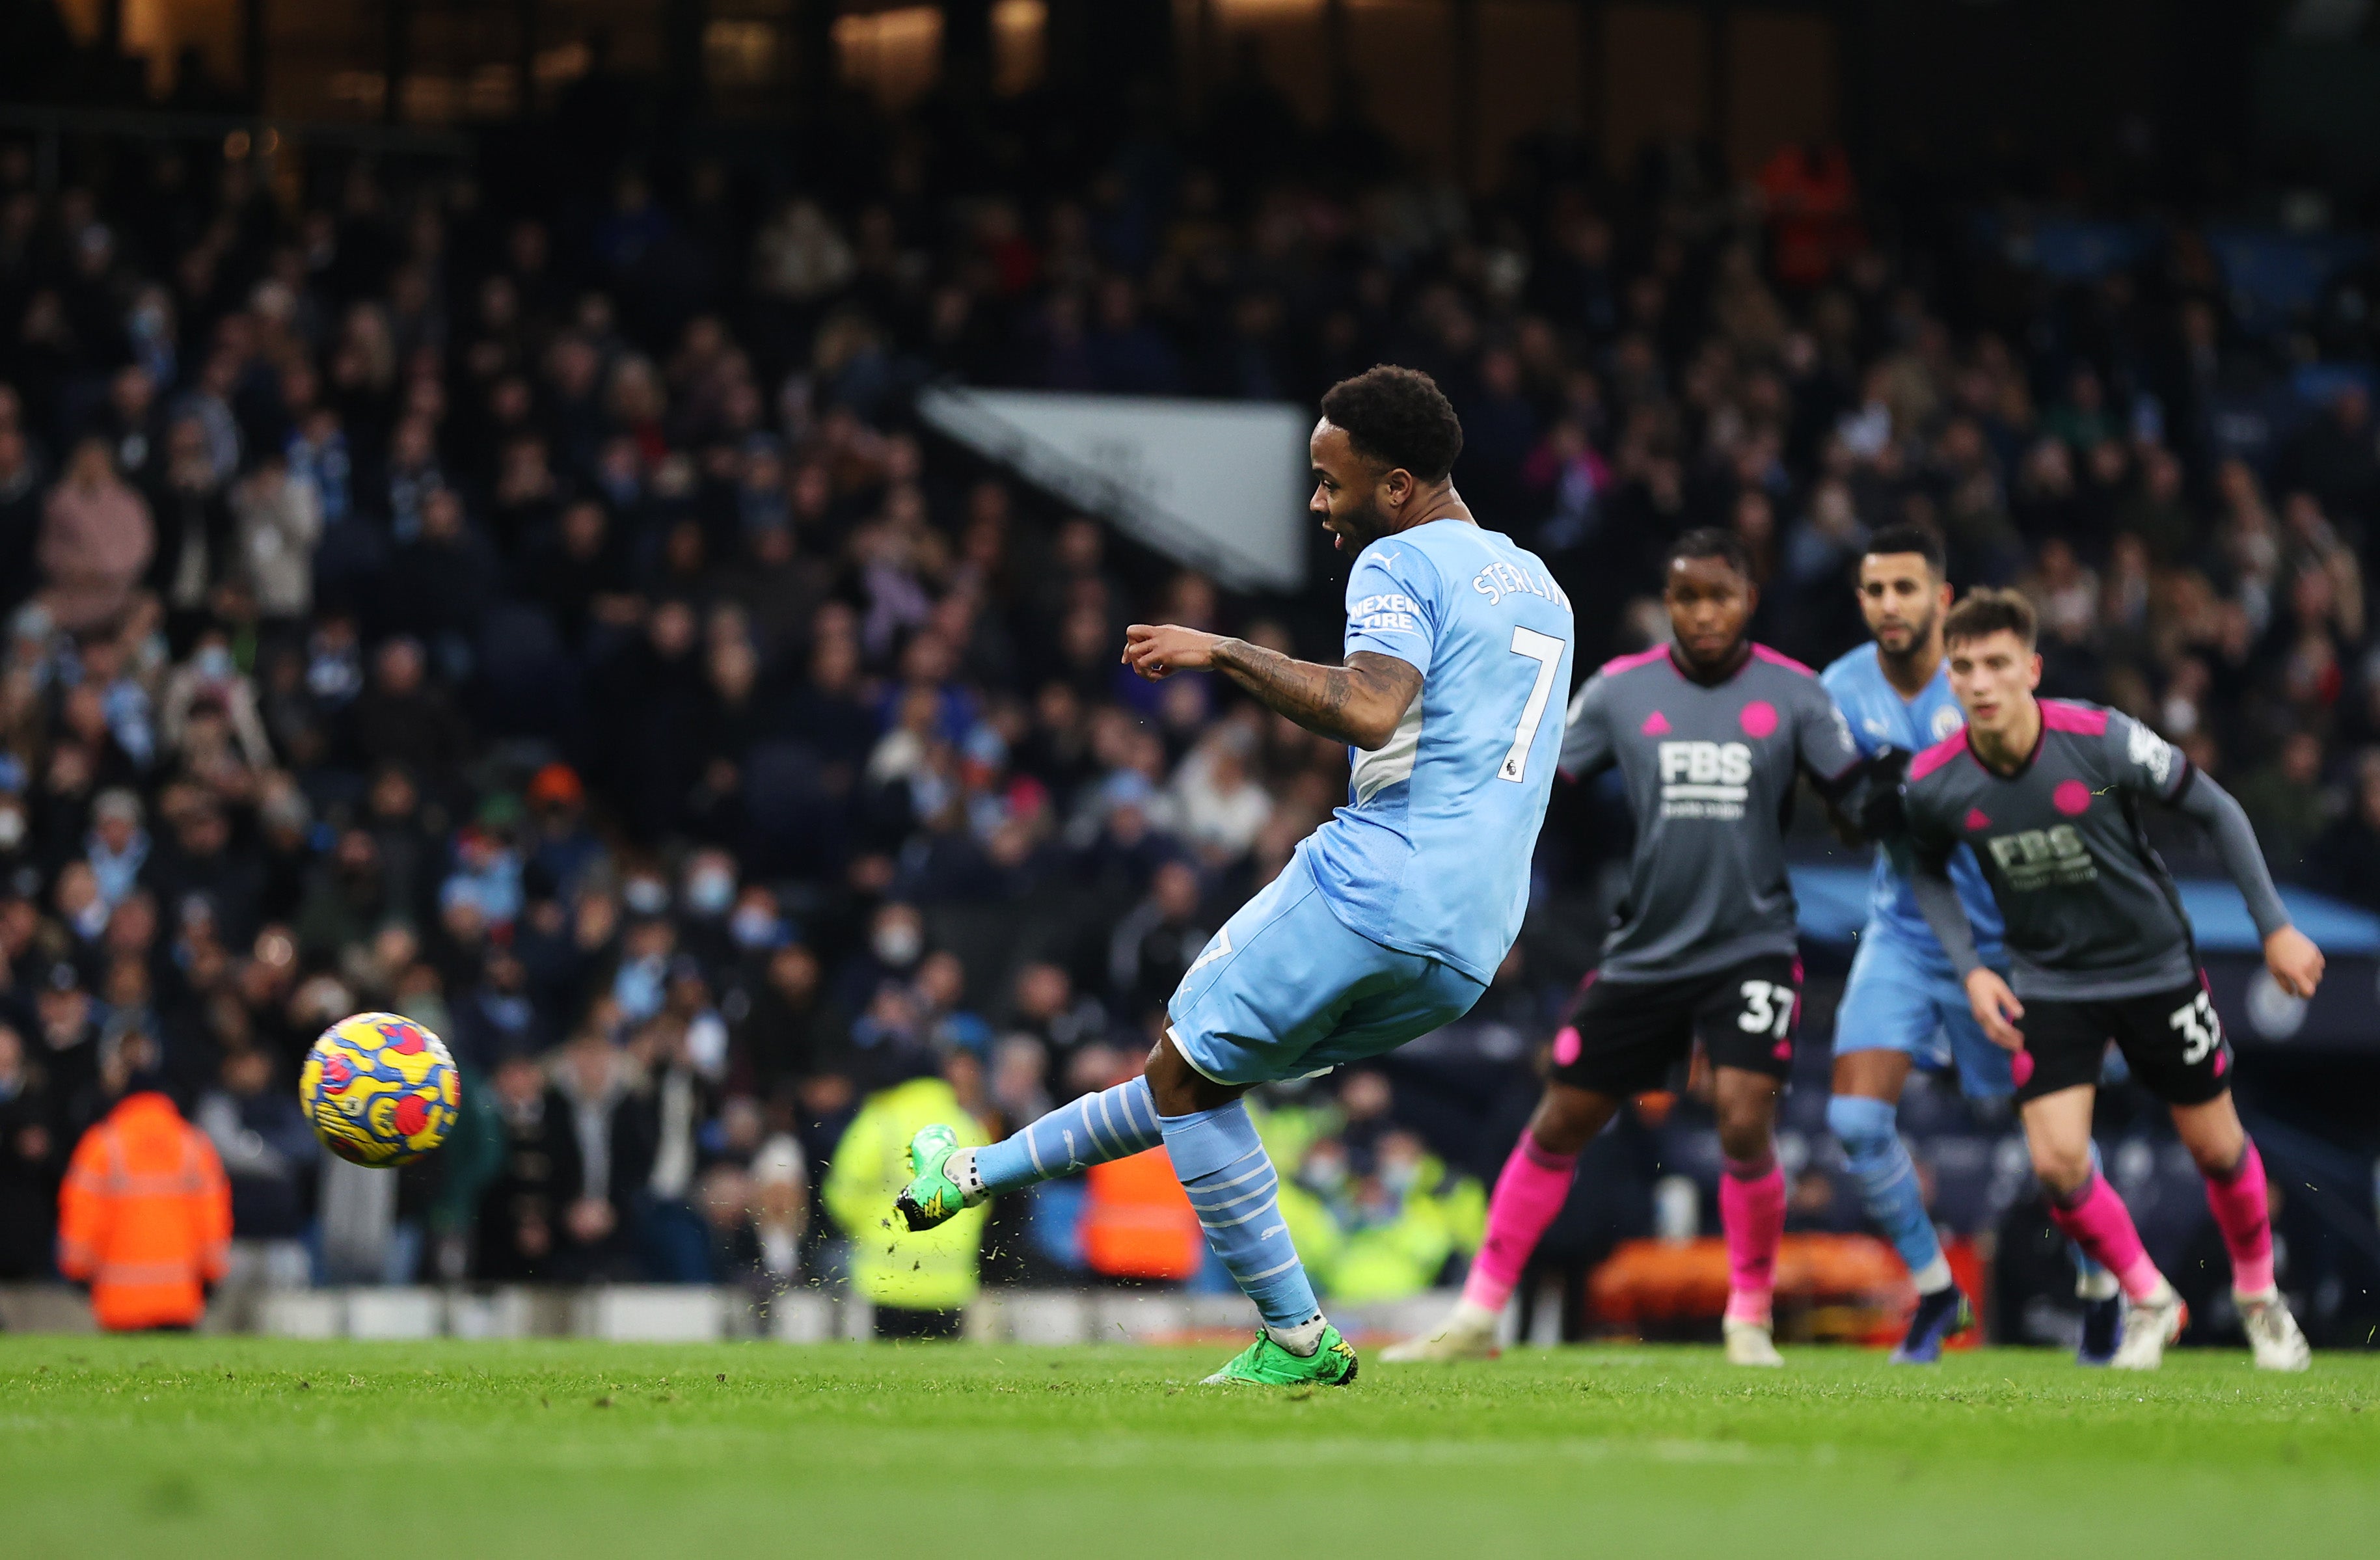 Raheem Sterling converts from the spot after winning Man City’s second penalty